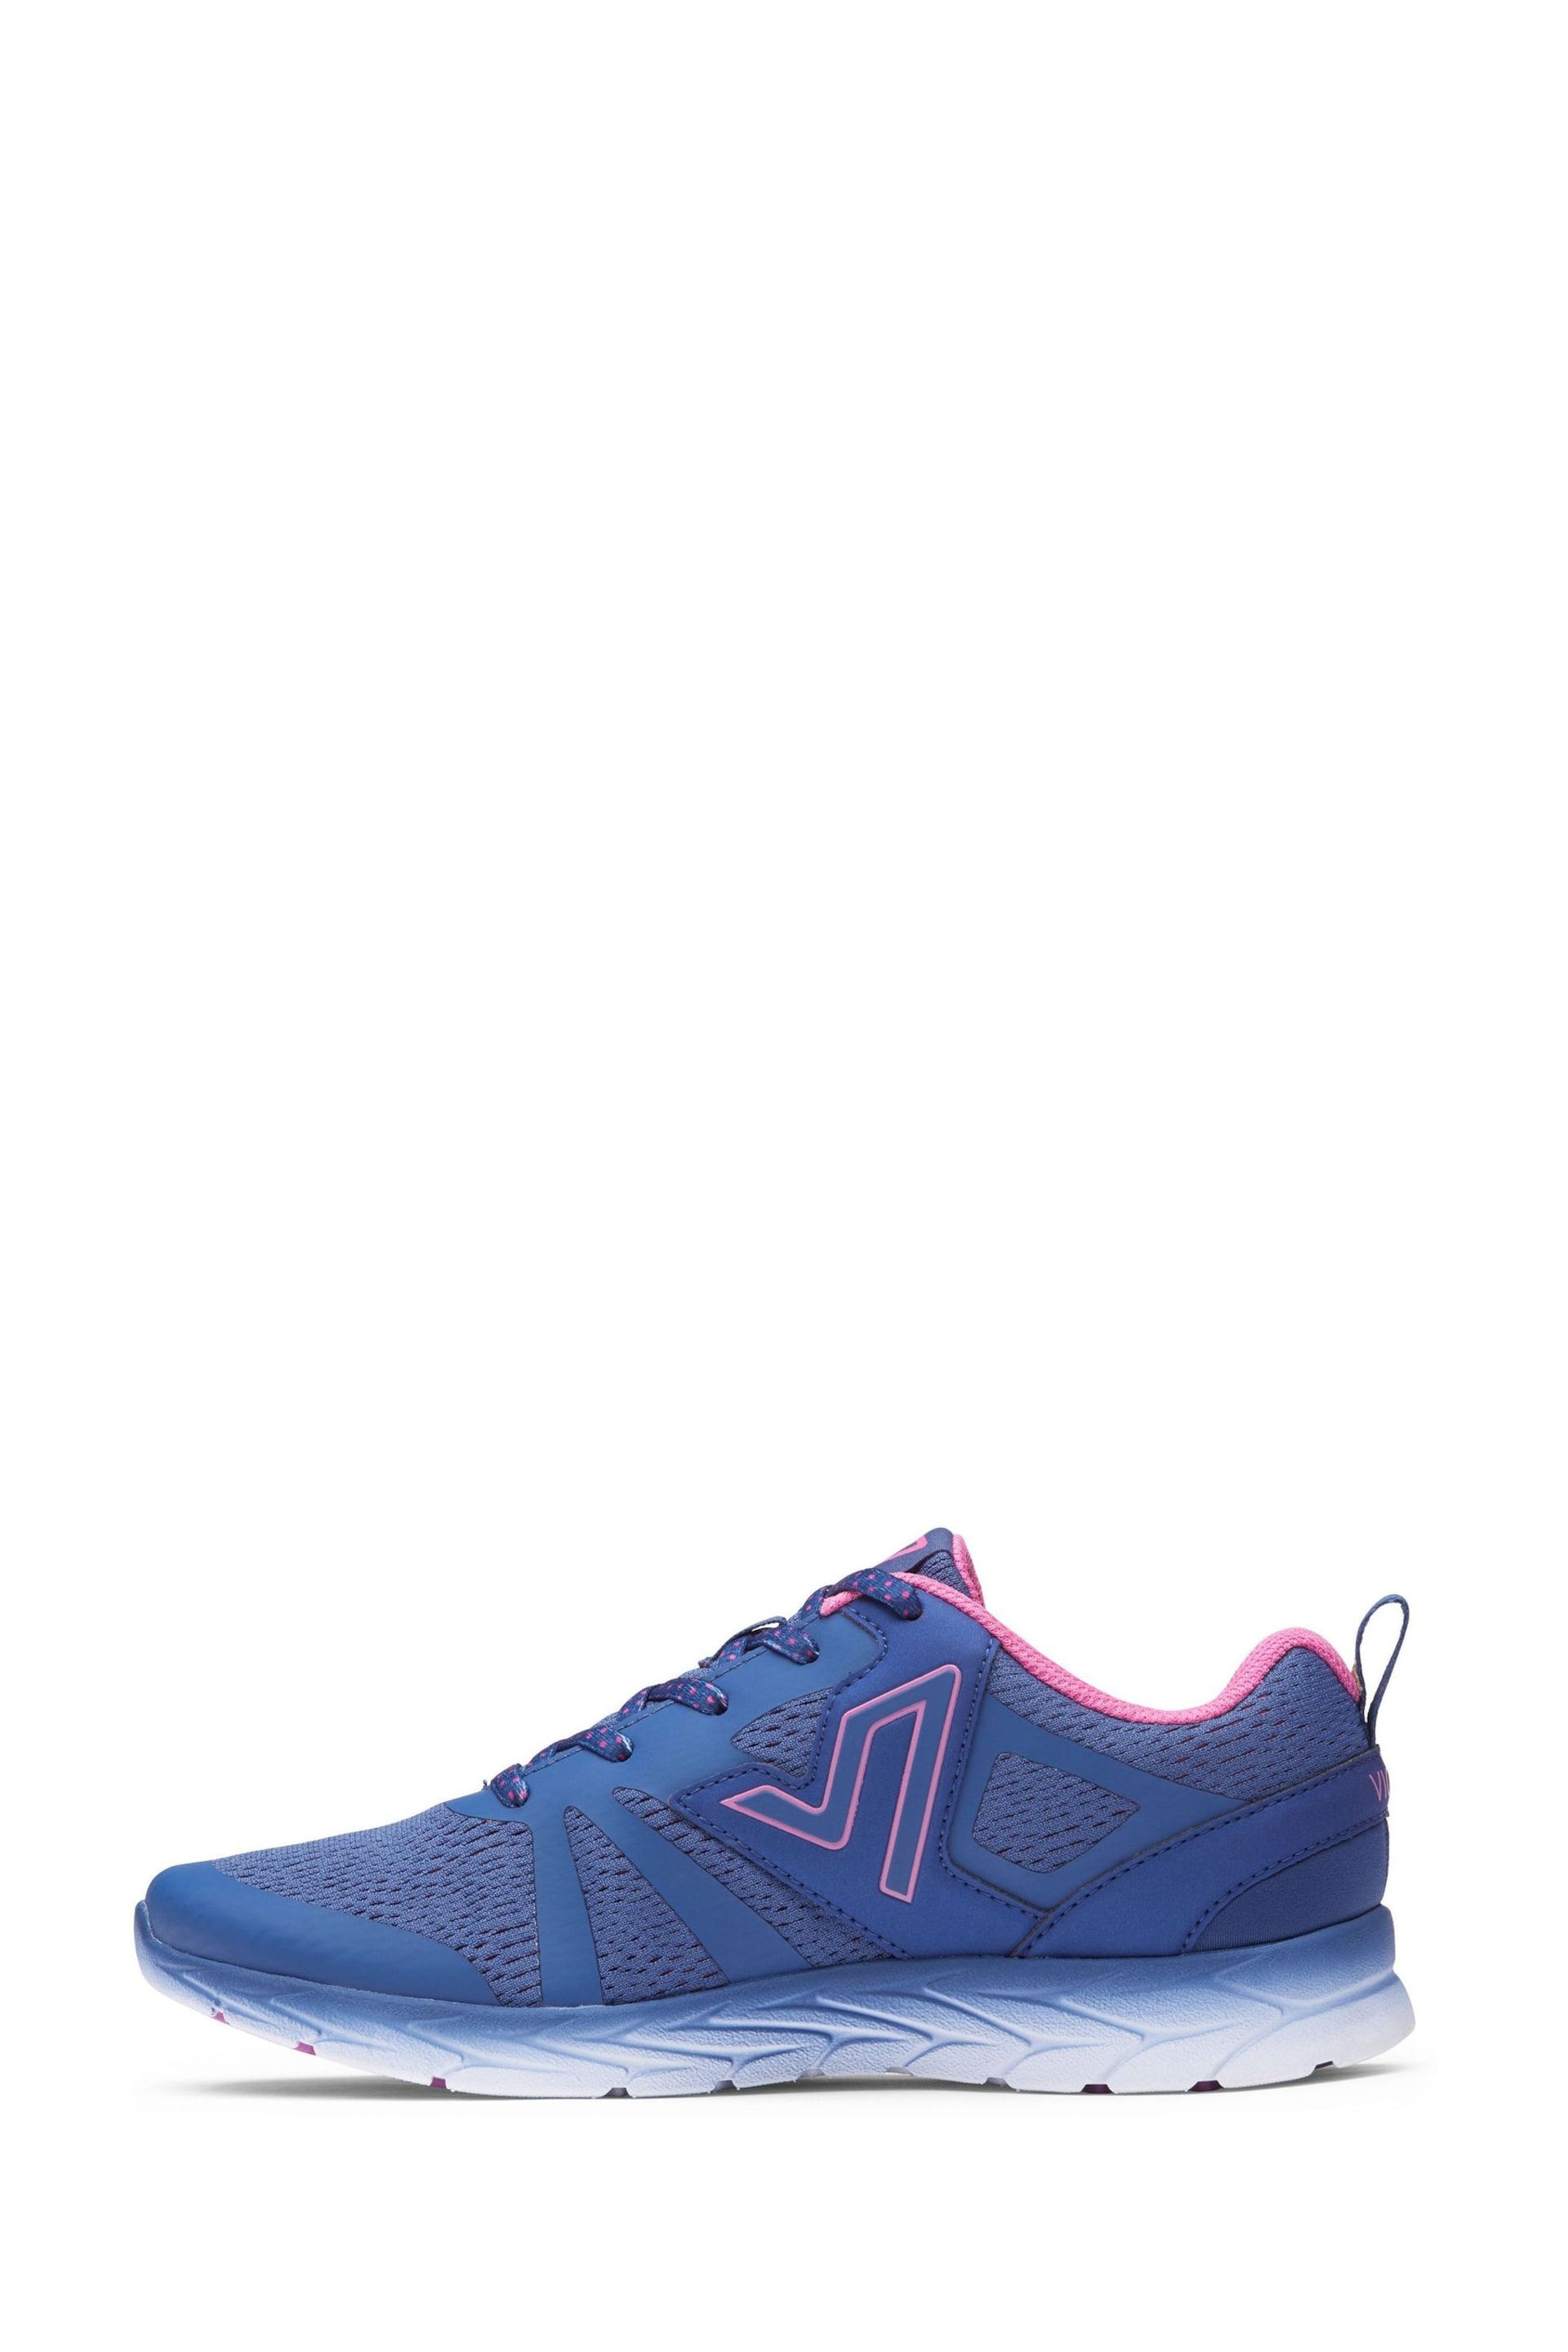 Vionic Miles Sneaker Trainers - Image 2 of 5